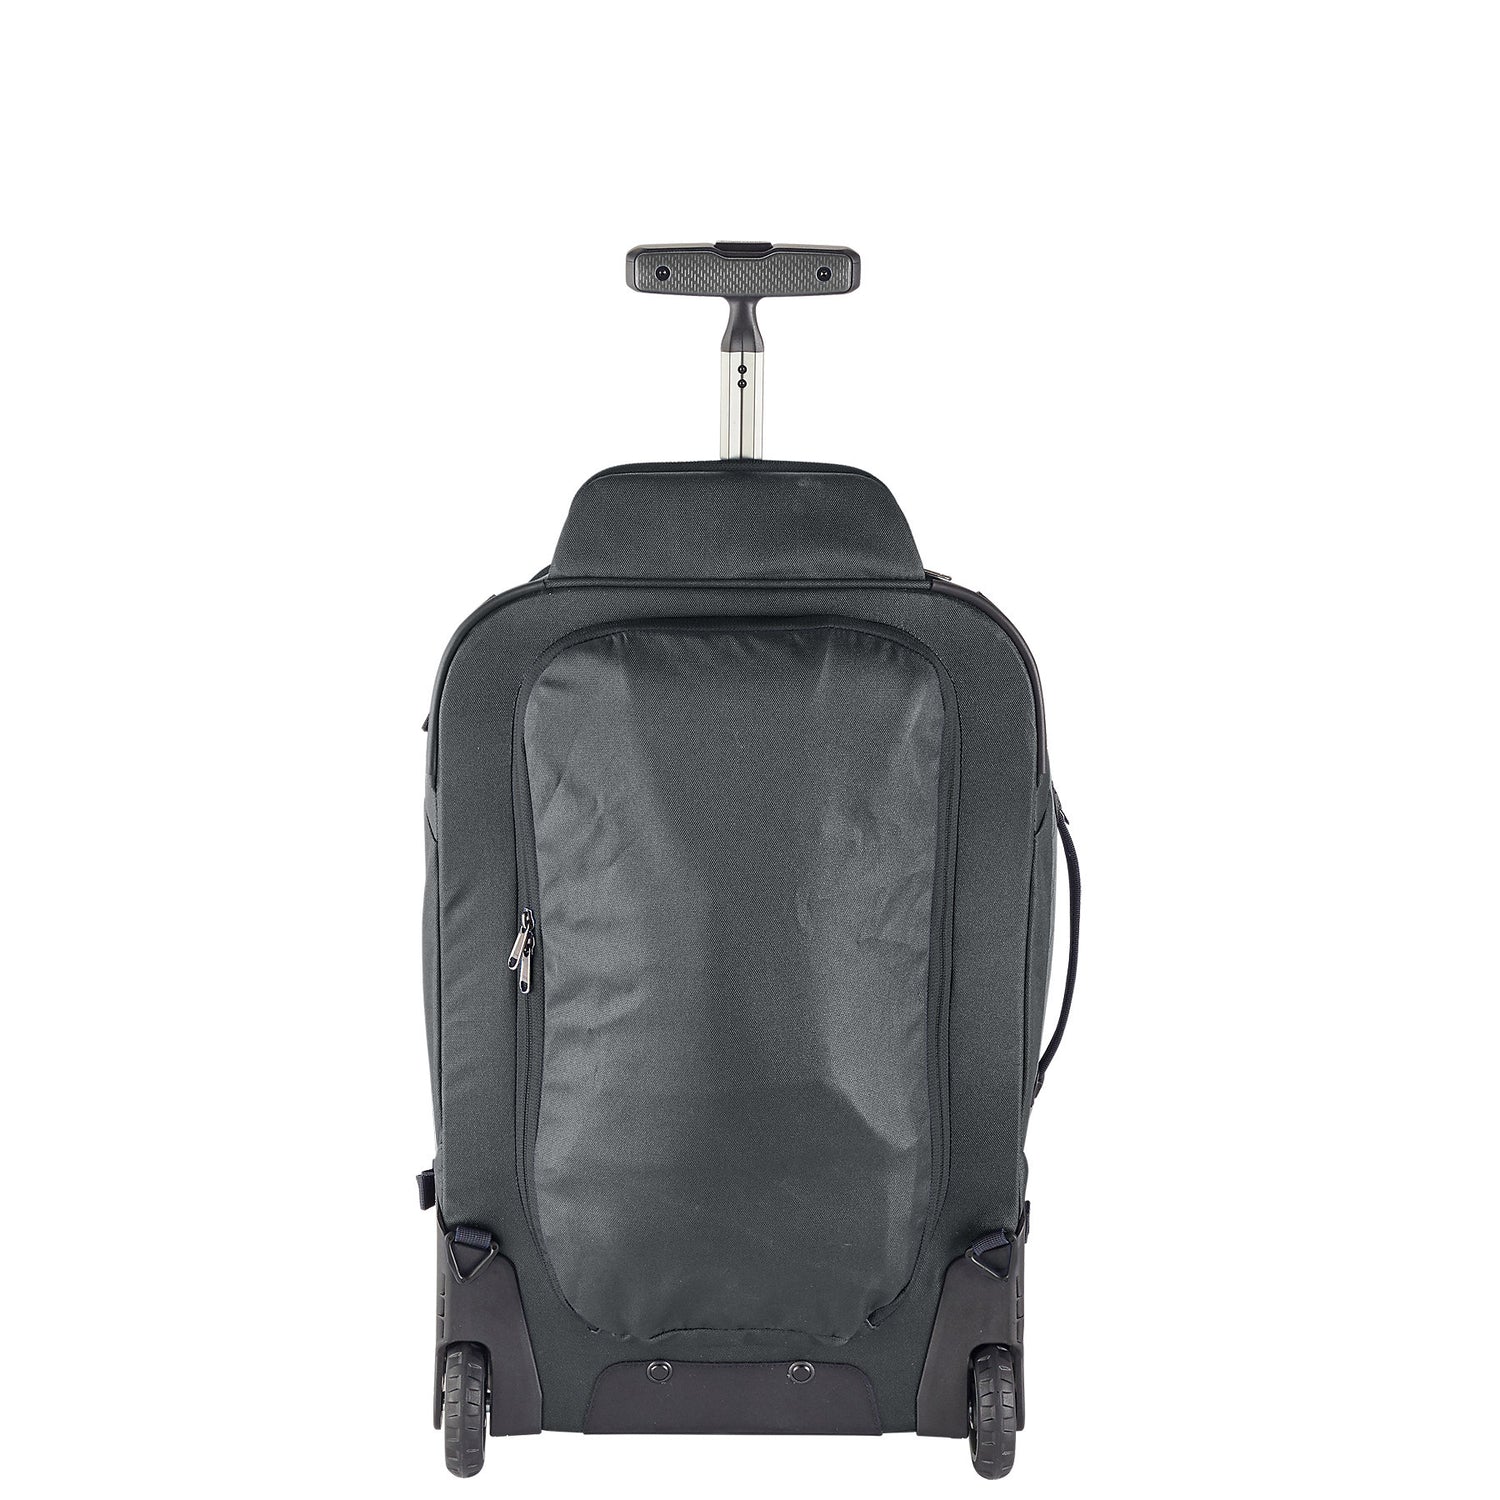 Roller Bag with Strap